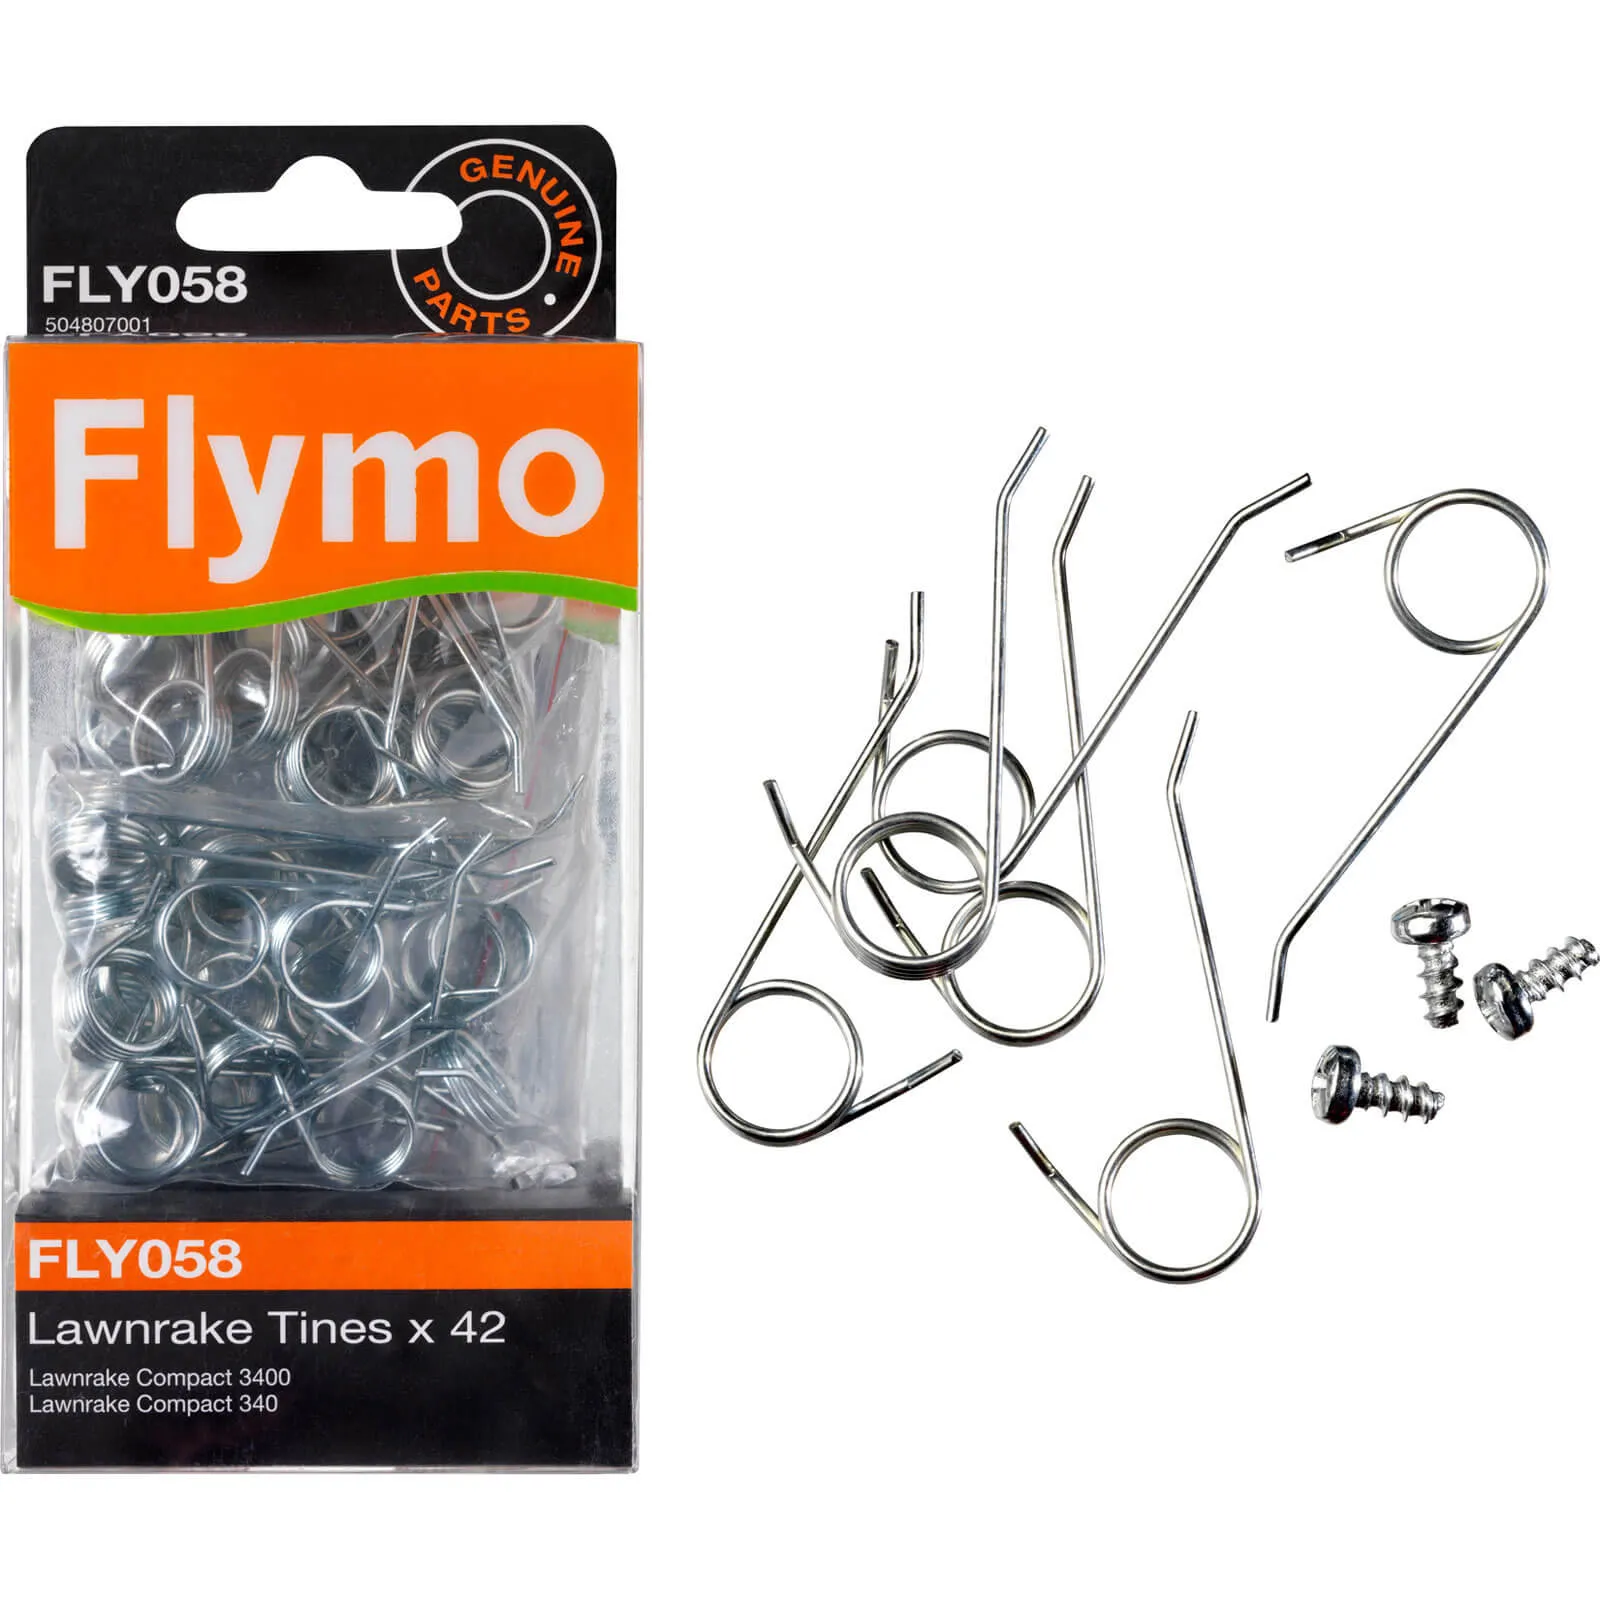 Flymo FLY058 Genuine Tines for Lawnrake Compact 3400 / 340 / 350 - Pack of 42